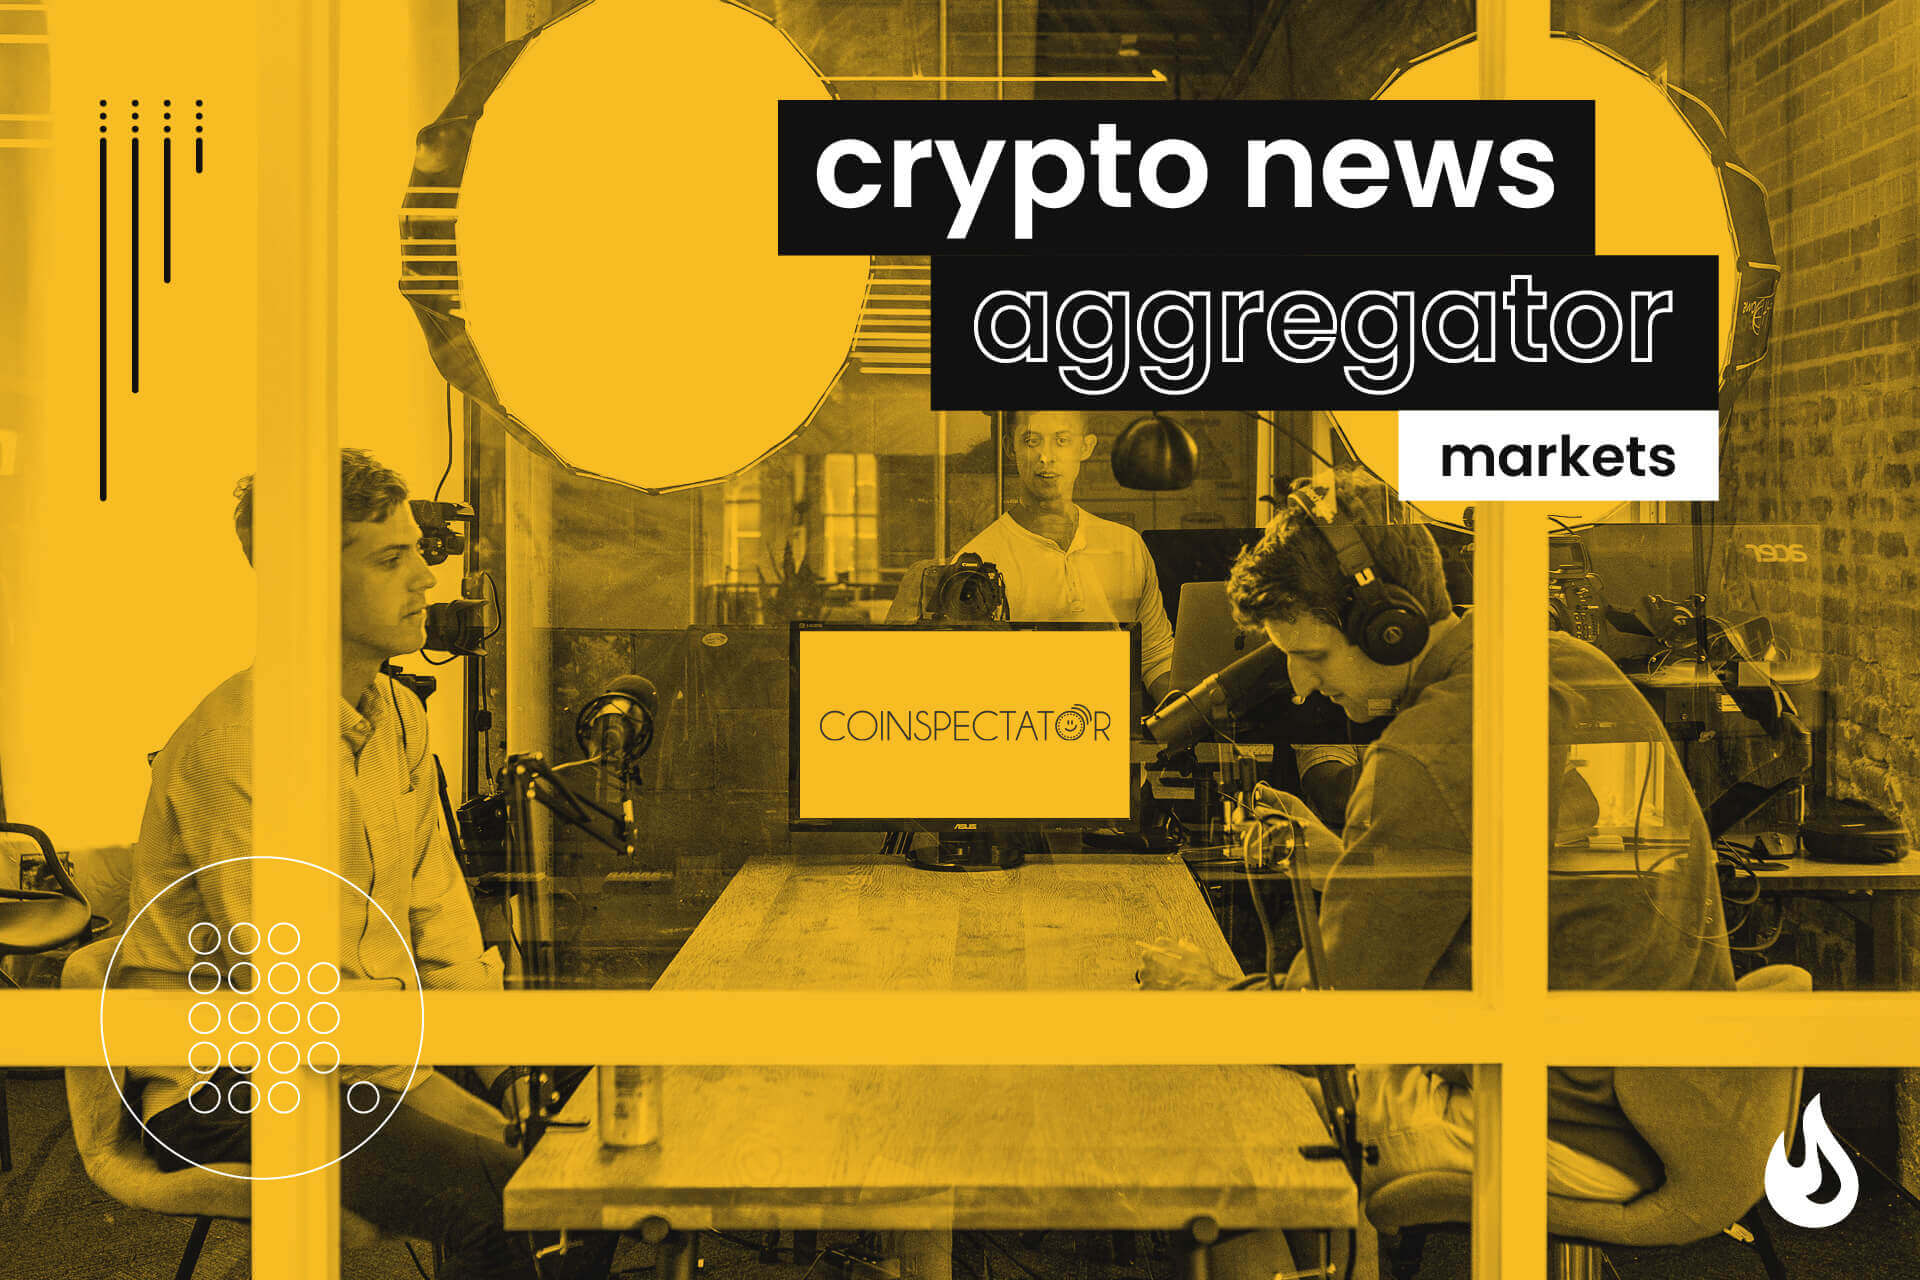 Cryptocurrency | Latest News on Cryptocurrency | Bitcoin, Dogecoin, Ethereum News